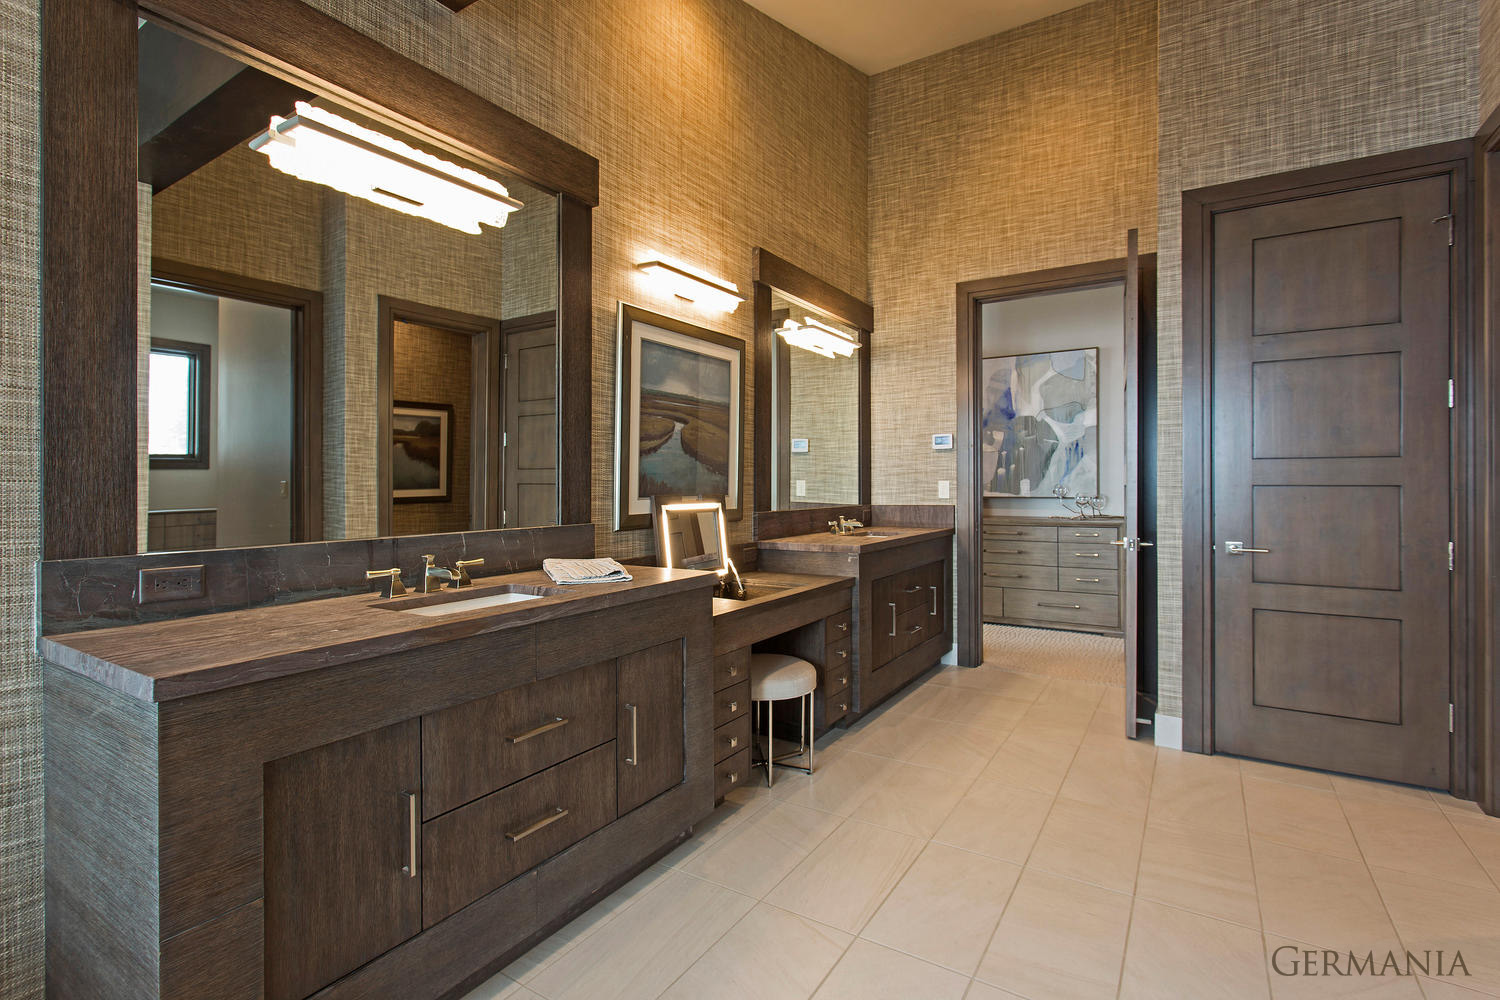 Custom home master bathrooms are an integral element to luxury home living. From the cabinets to the doors, Germania Construction offers incredible craftmanship.